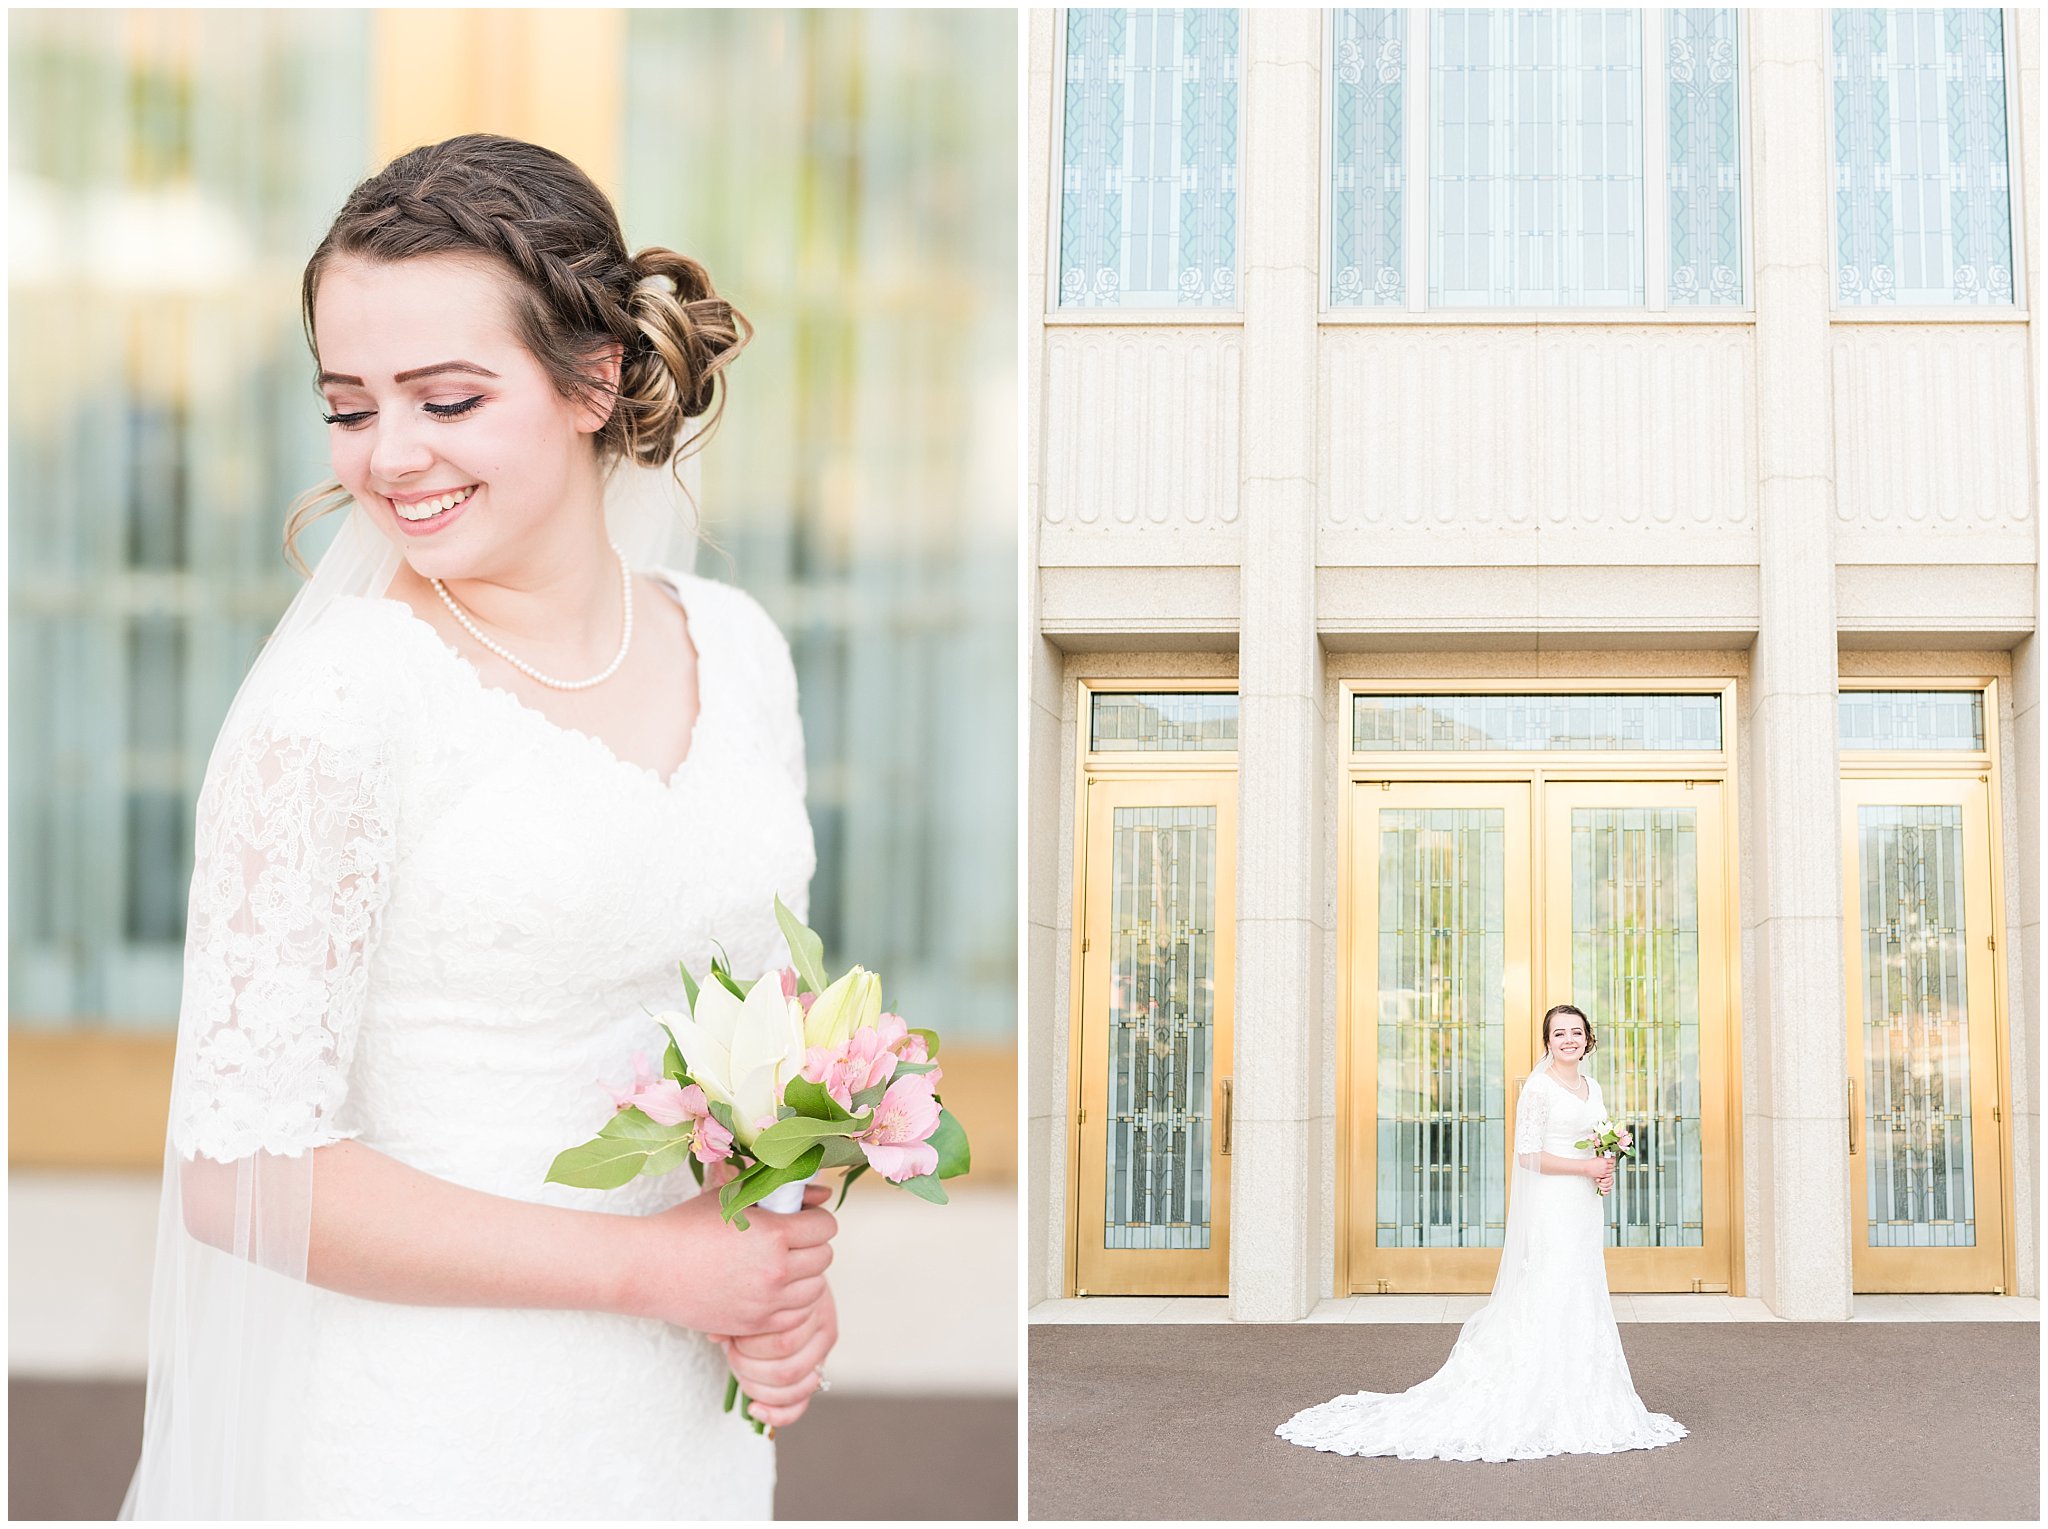 Bridal portraits with bride in elegant lace dress and veil | Ogden Temple Summer Formal Session | Ogden Temple Wedding | Jessie and Dallin Photography